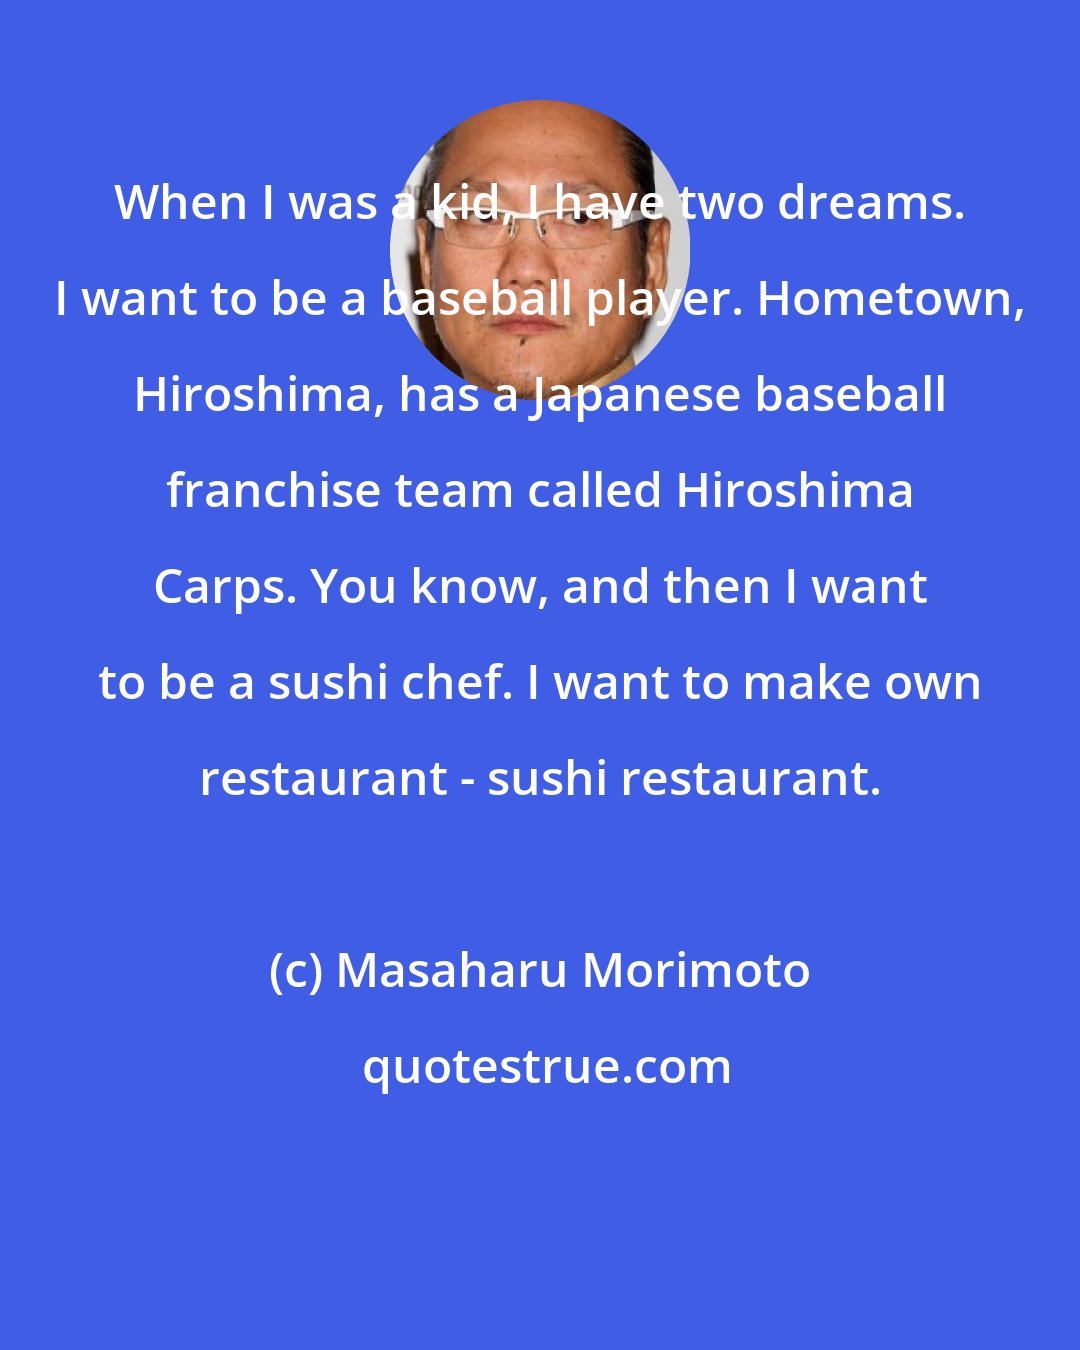 Masaharu Morimoto: When I was a kid, I have two dreams. I want to be a baseball player. Hometown, Hiroshima, has a Japanese baseball franchise team called Hiroshima Carps. You know, and then I want to be a sushi chef. I want to make own restaurant - sushi restaurant.